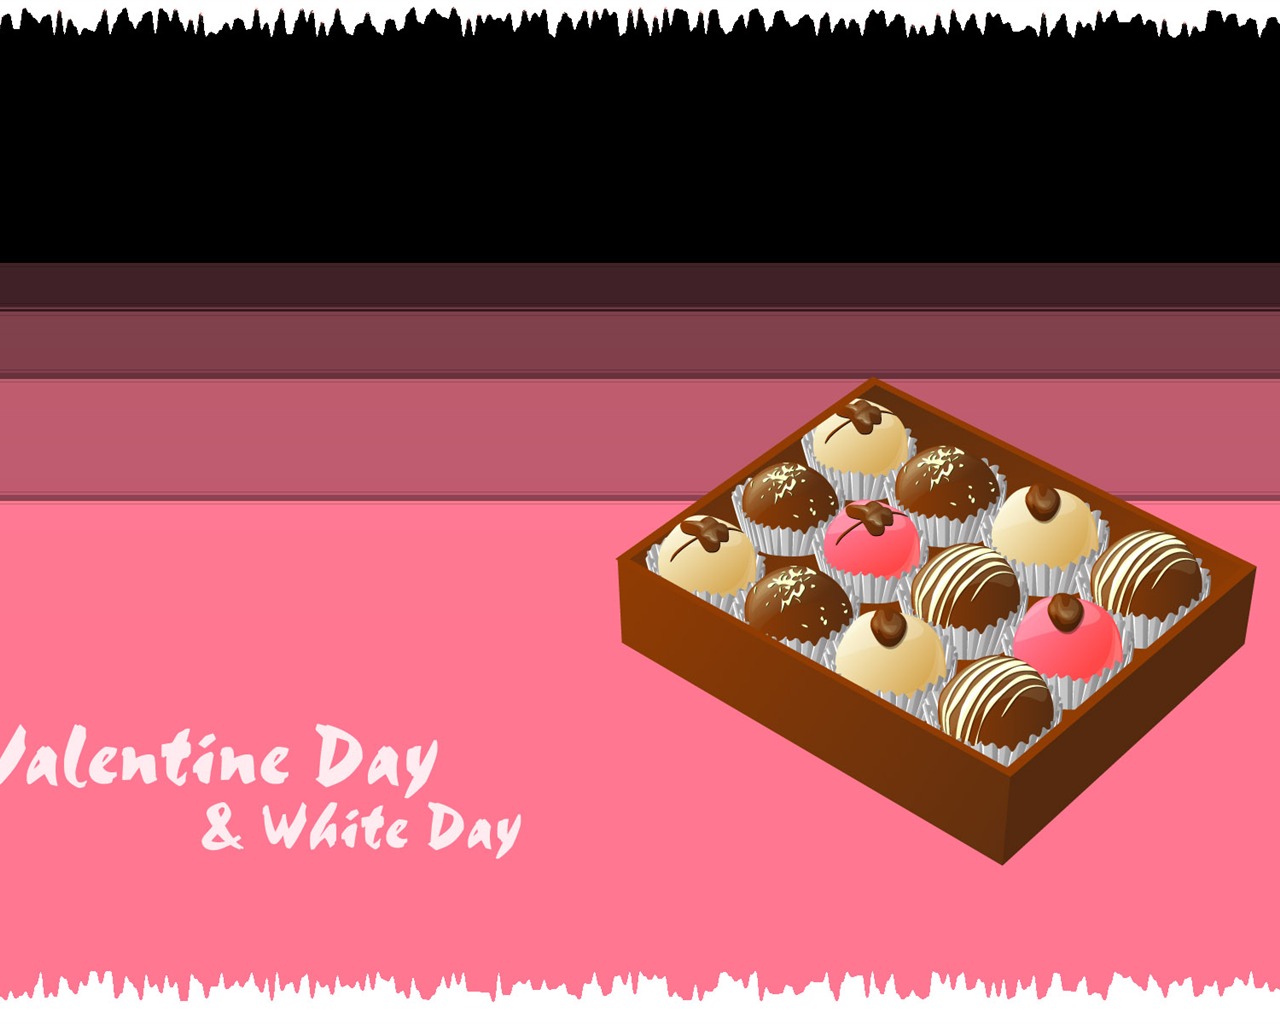 Valentine's Day Theme Wallpapers (1) #9 - 1280x1024